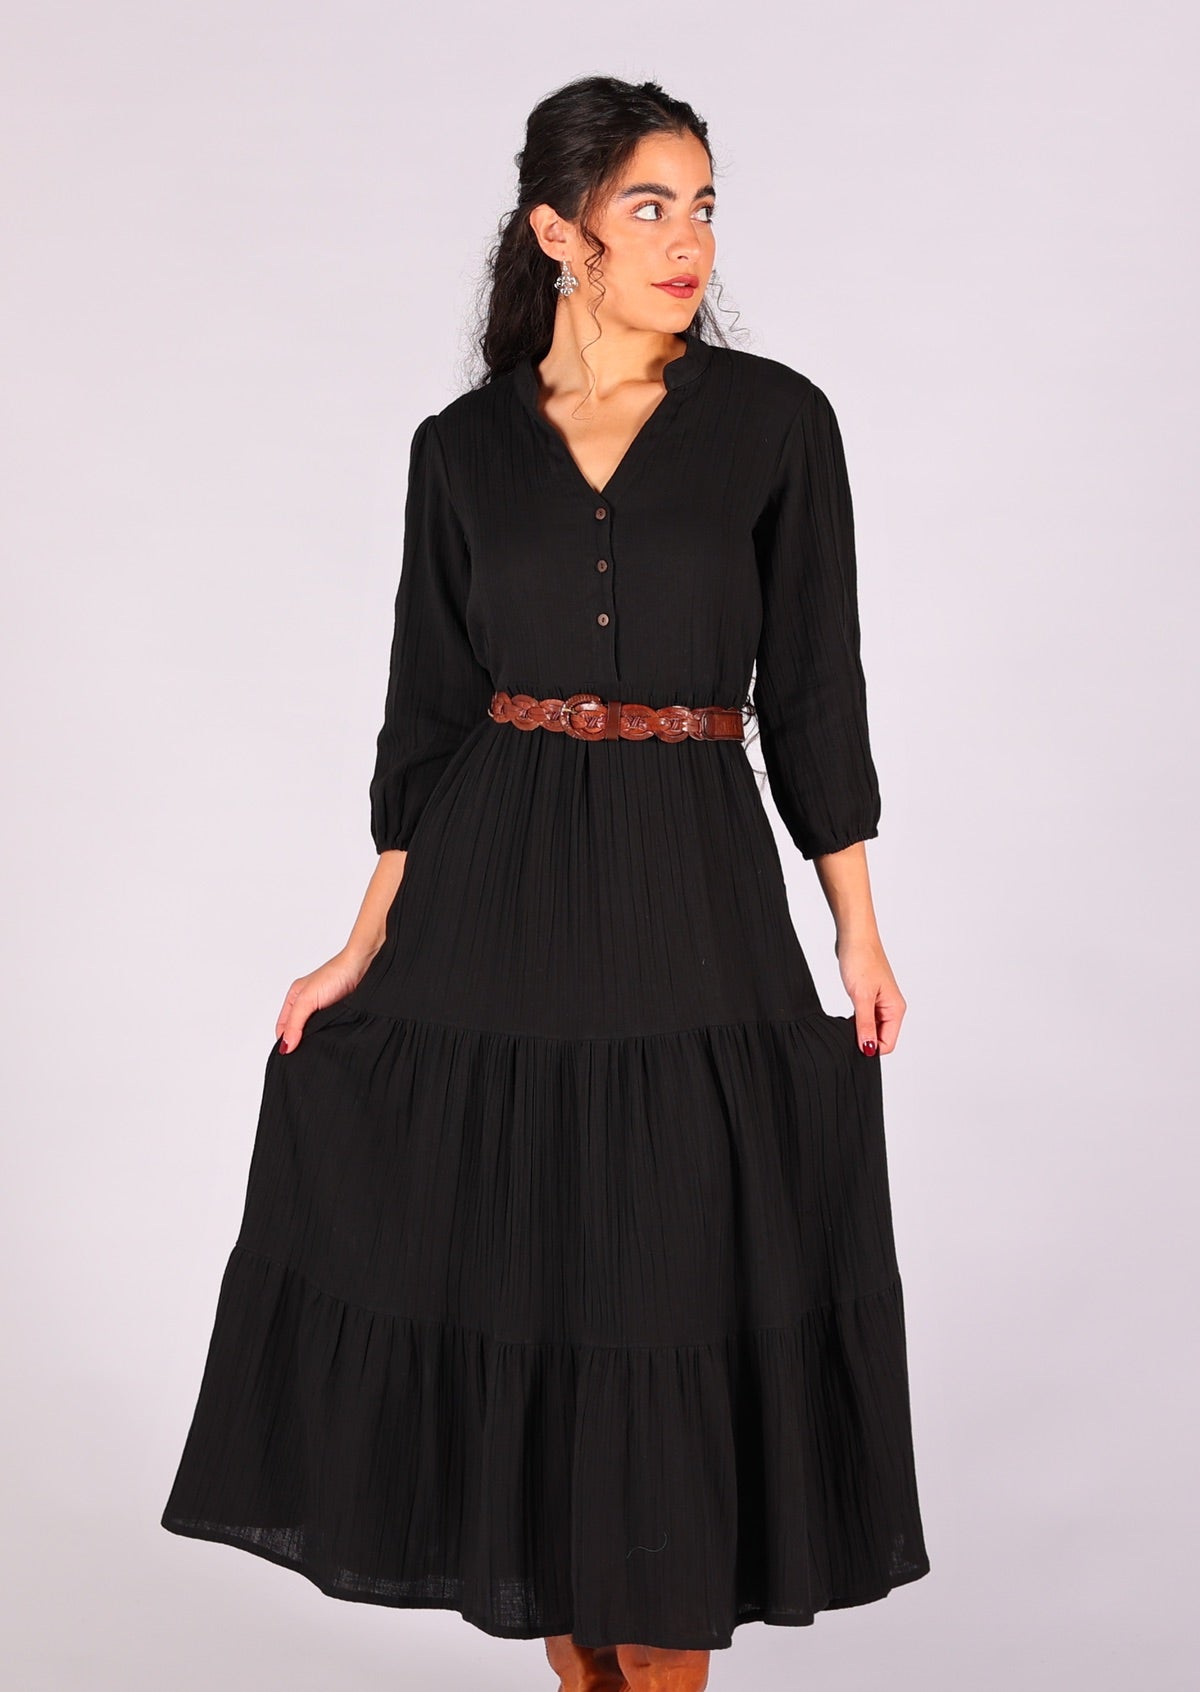 Look amazing and be super comfortable in this double cotton maxi dress